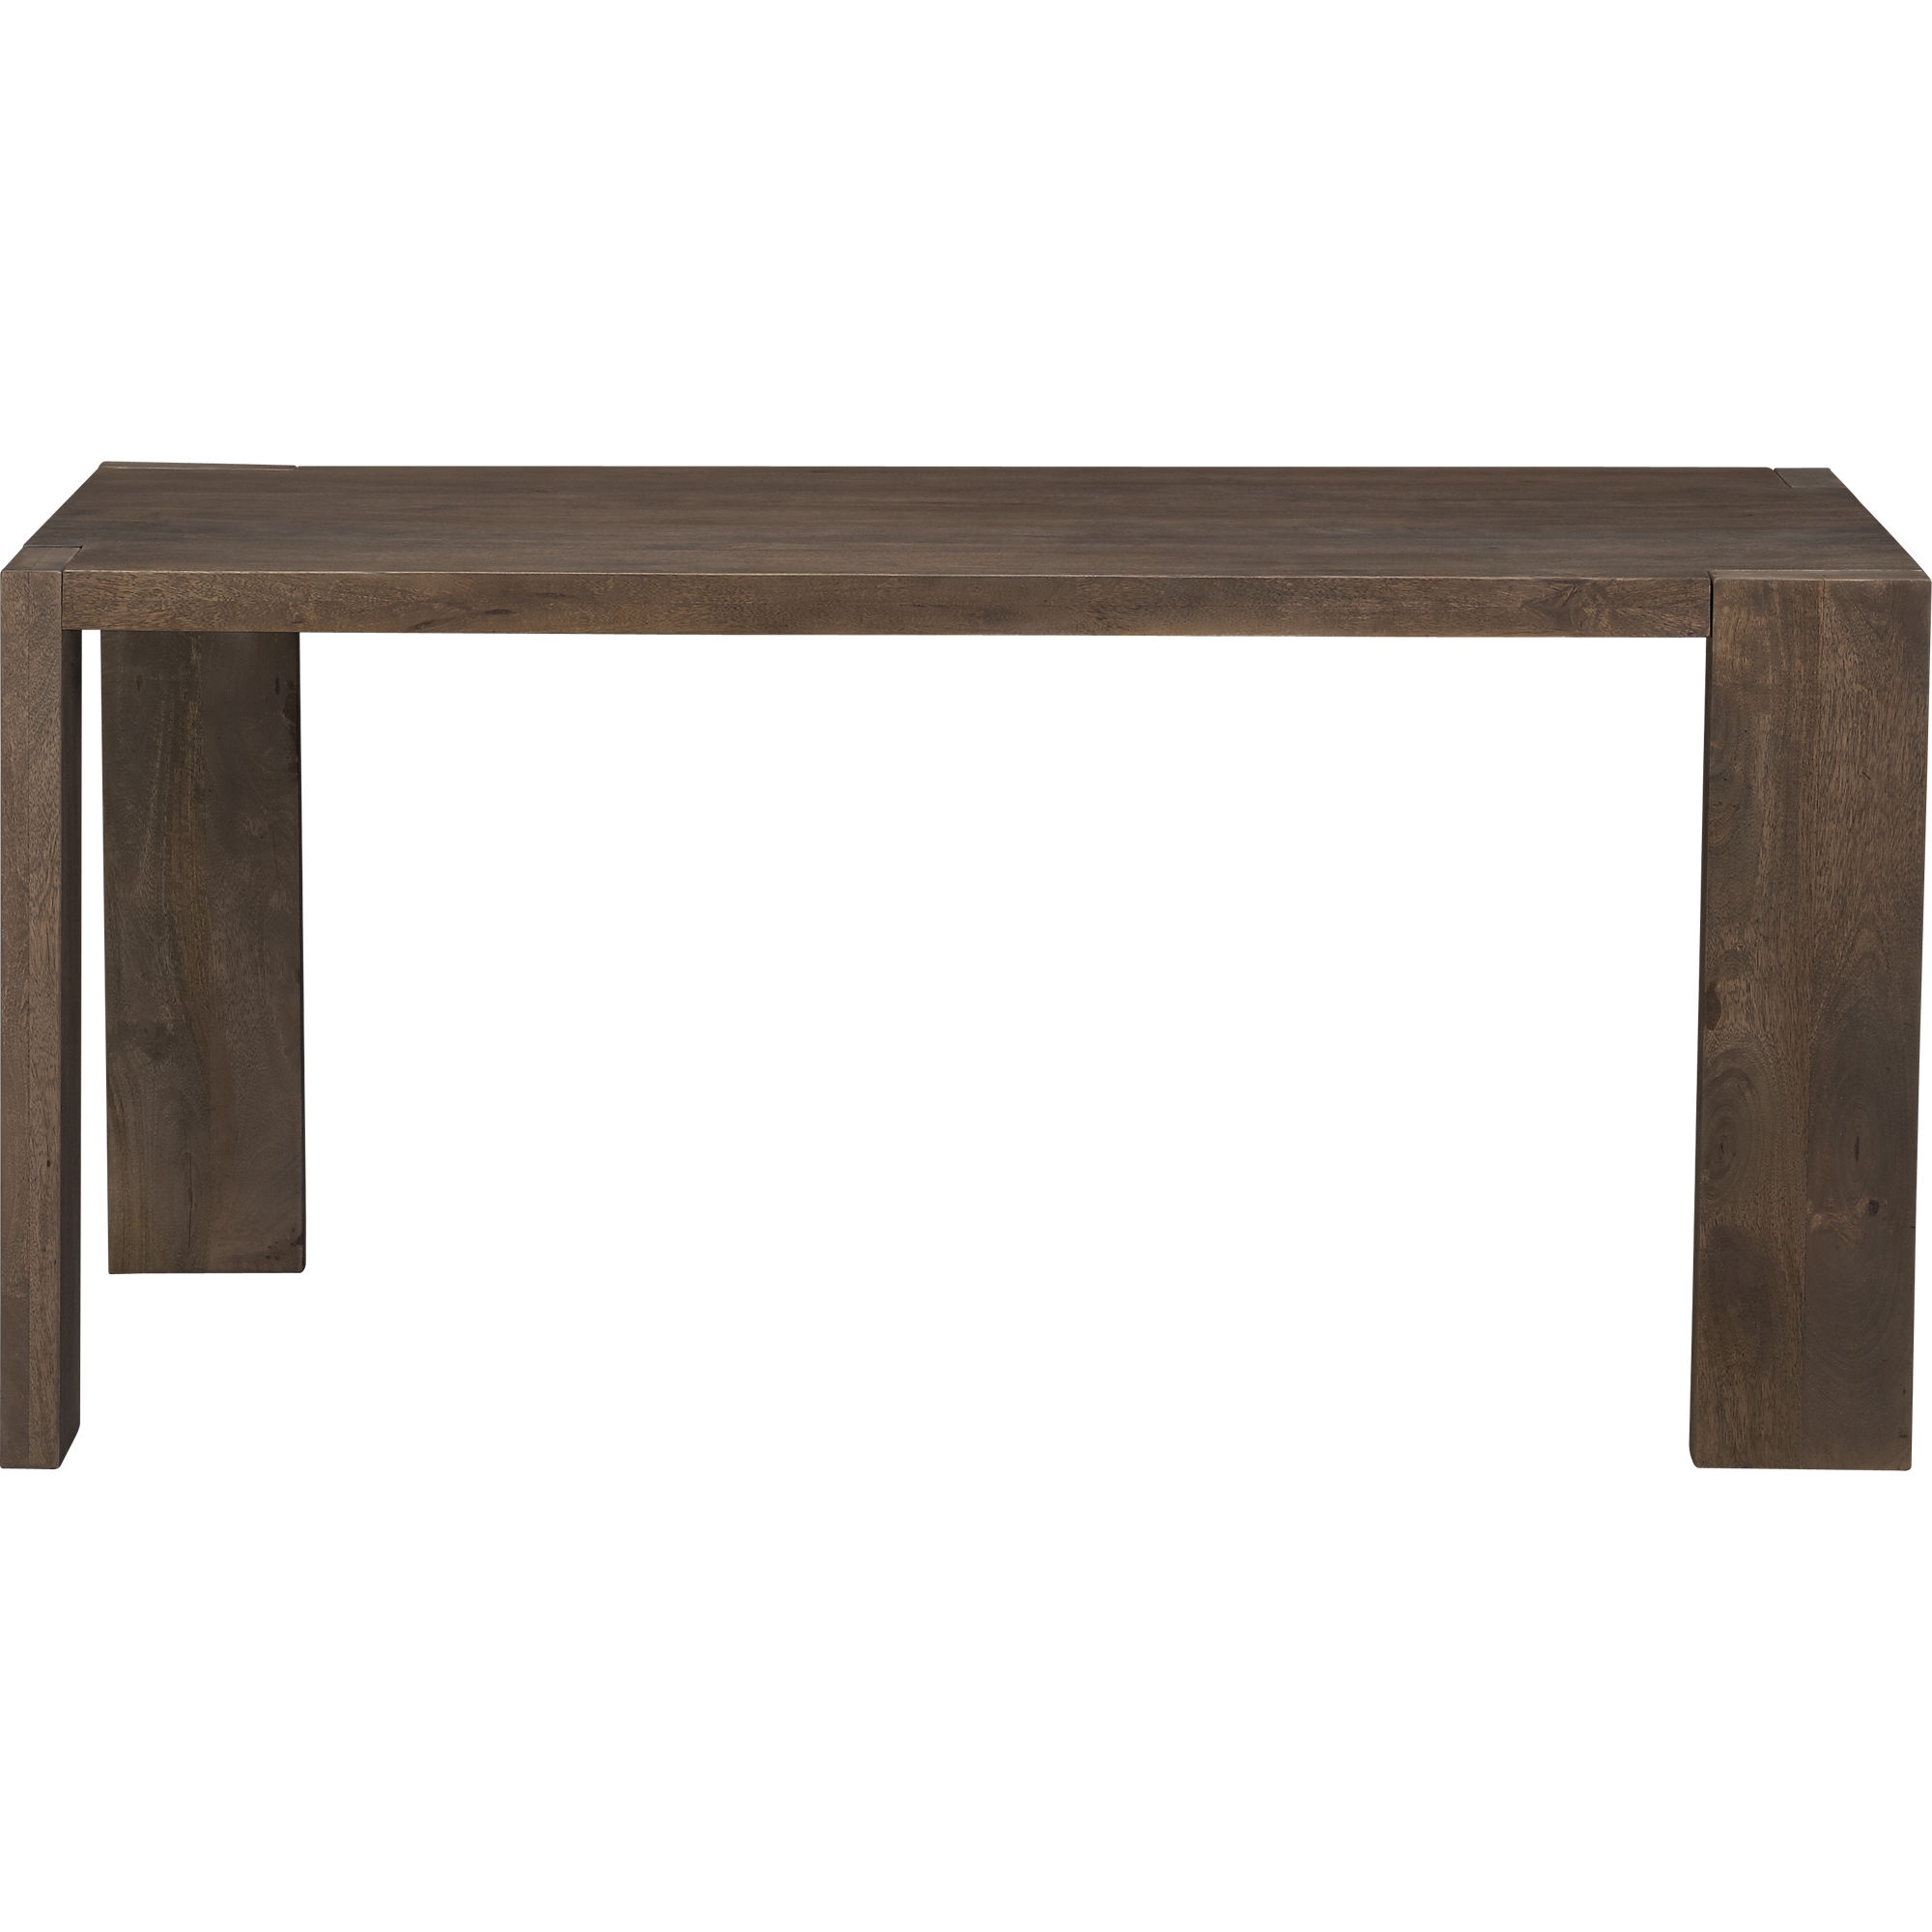 Blox 35x63 dining table - Image 0